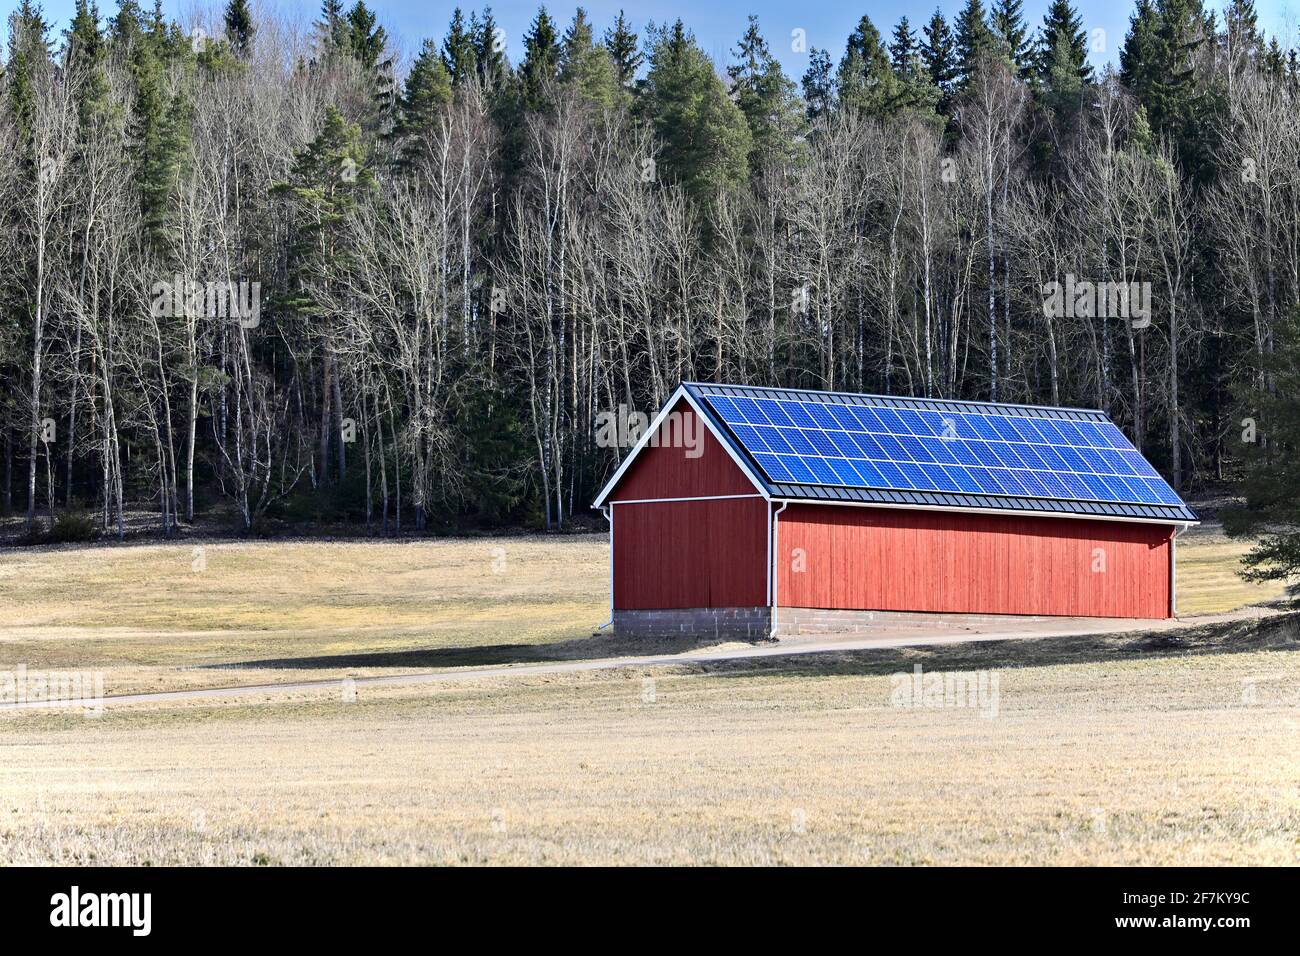 Solar panels on rooftop of a red outbuilding in rural Finland on a sunny day of spring. Stock Photo